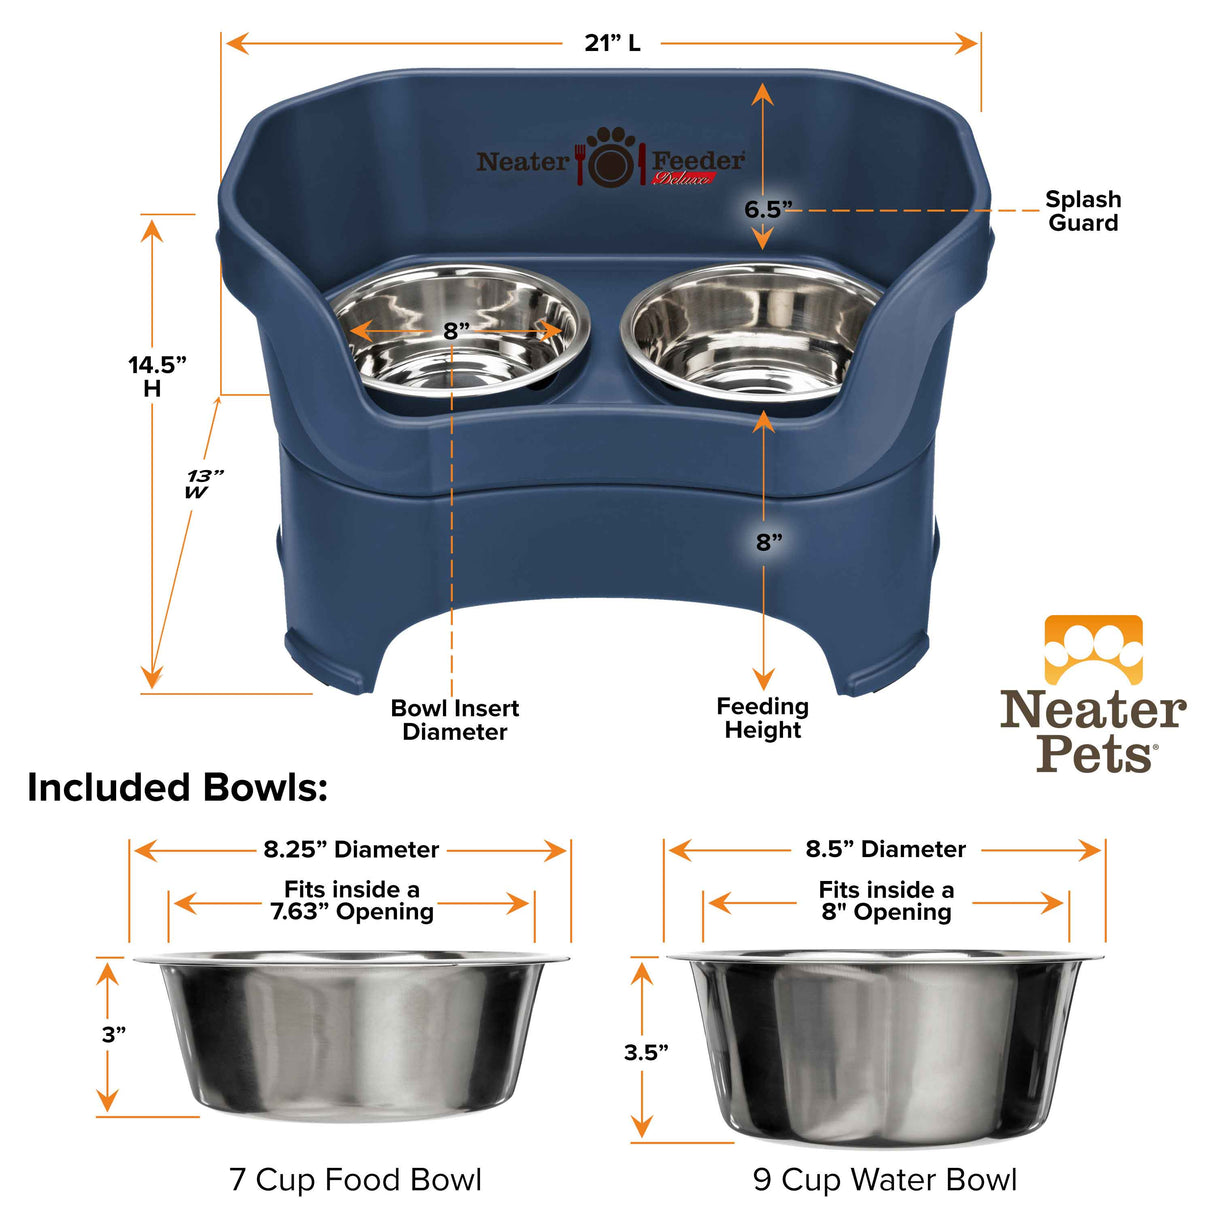 Deluxe Dark Blue Large Dog Neater Feeder and Bowl dimensions